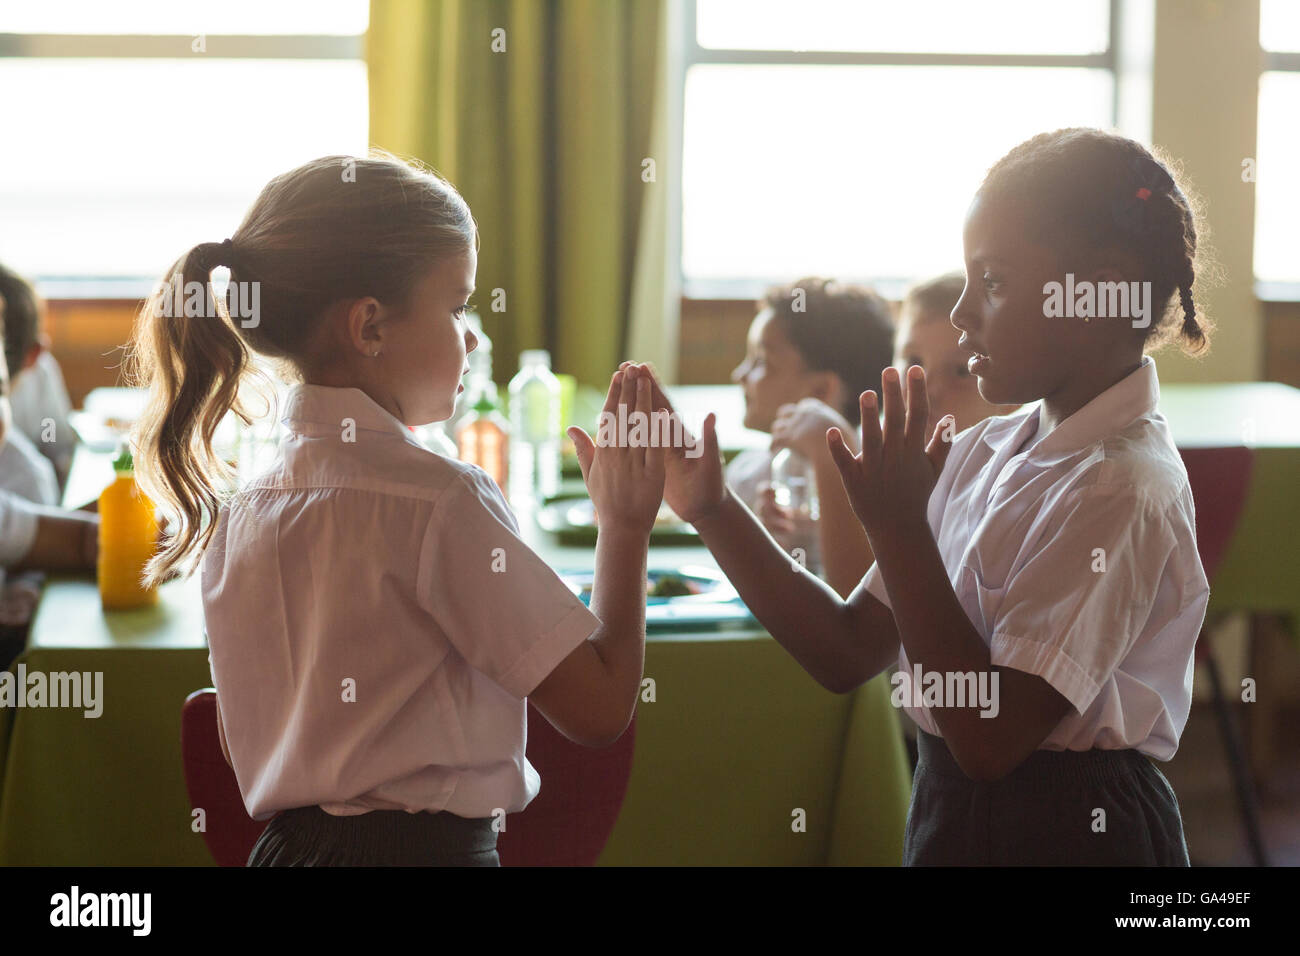 Girls playing clapping game Stock Photo